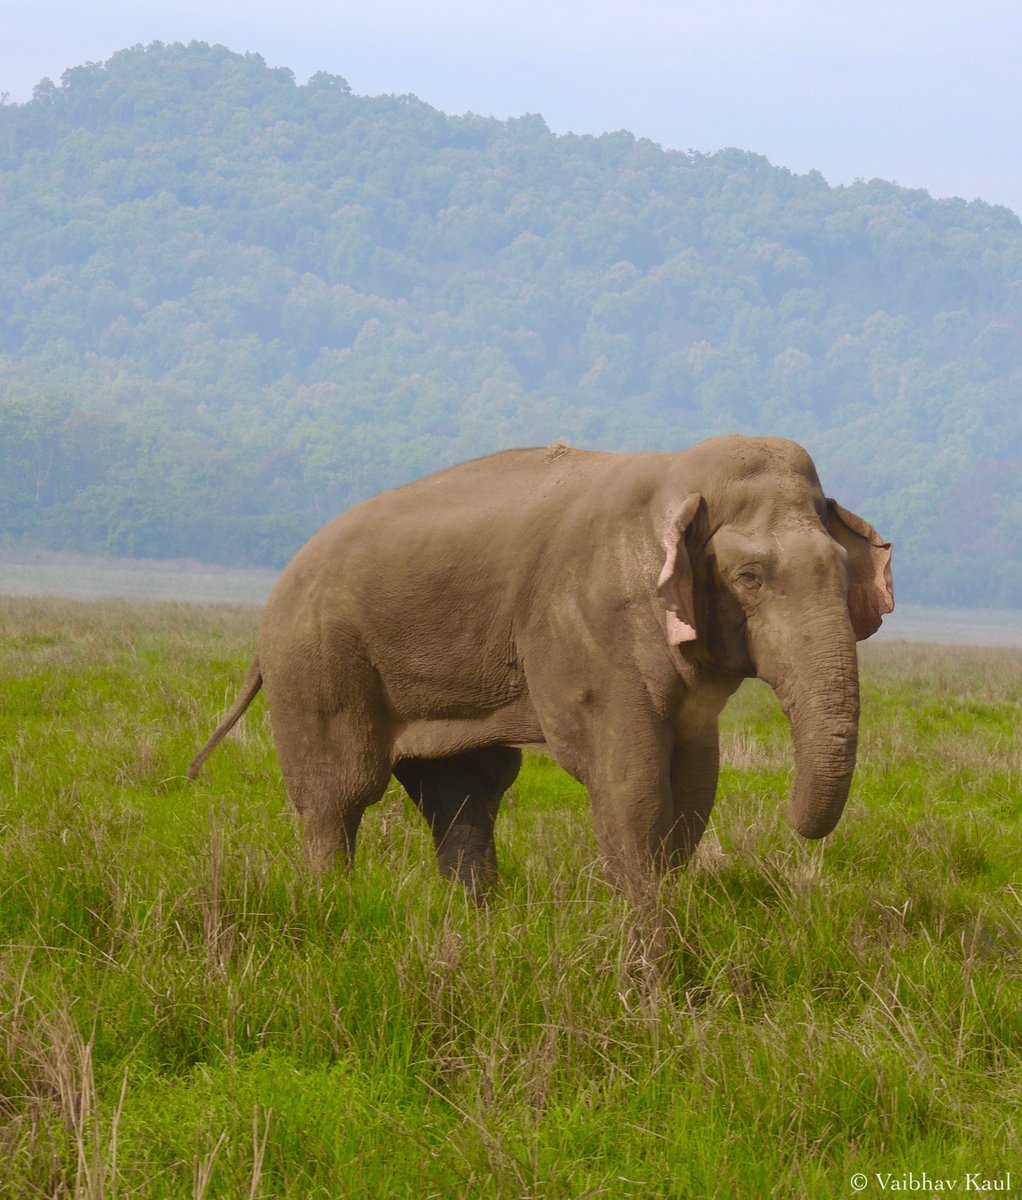 Having entered the frenzied state of musth, a tuskless Asian bull elephant displays testosteroney aggression in the riparian grasslands of Dhikala.